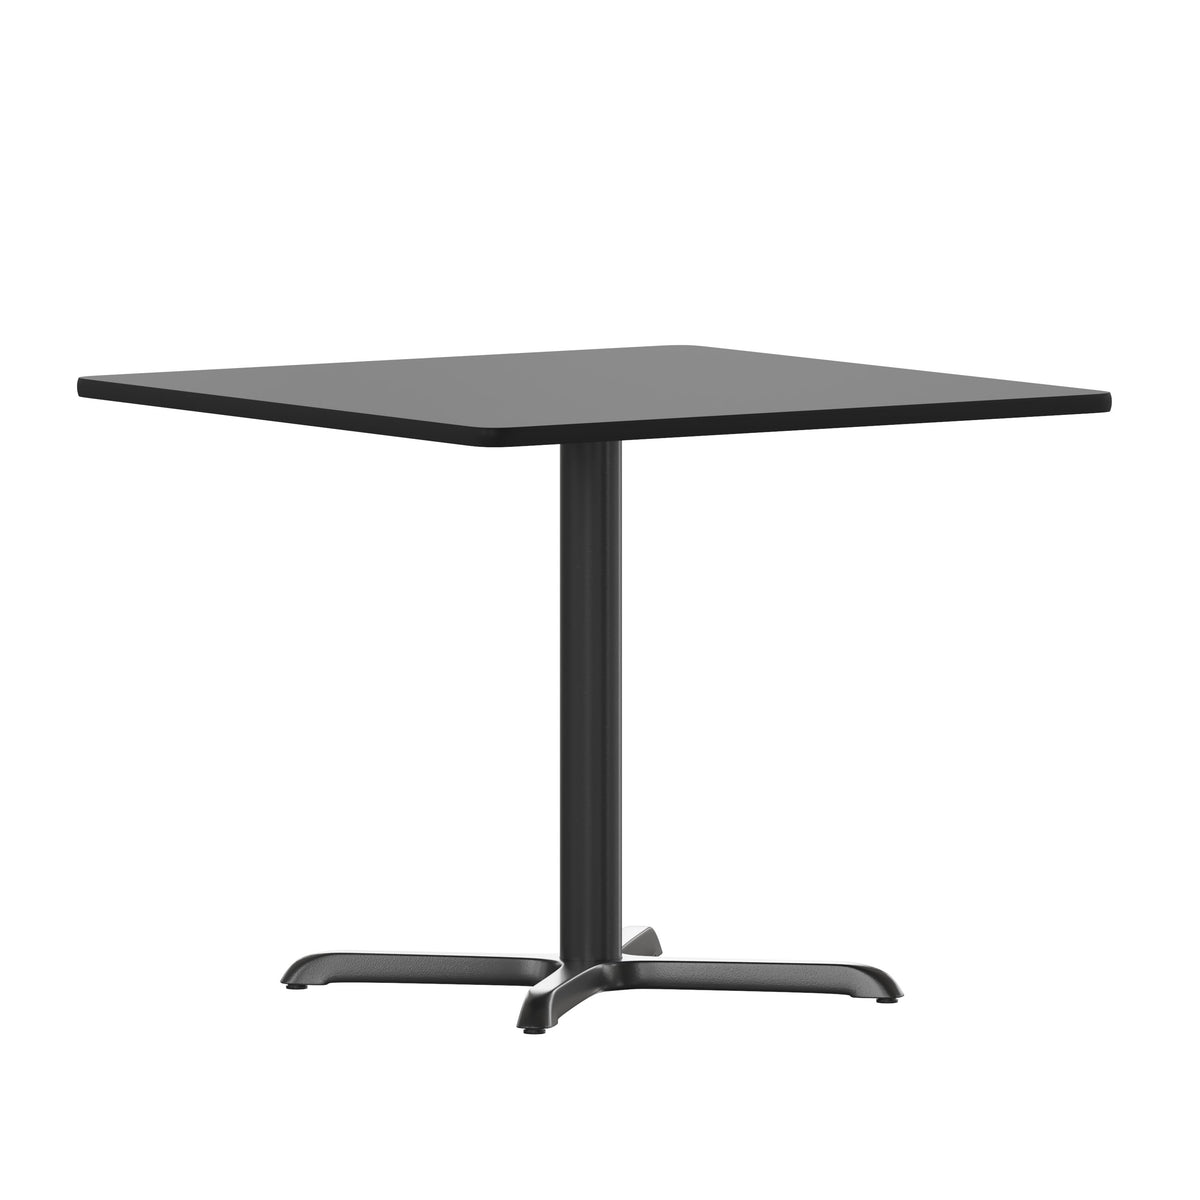 Black |#| 36inch Square Black Laminate Table Top with 30inch x 30inch Table Height Base